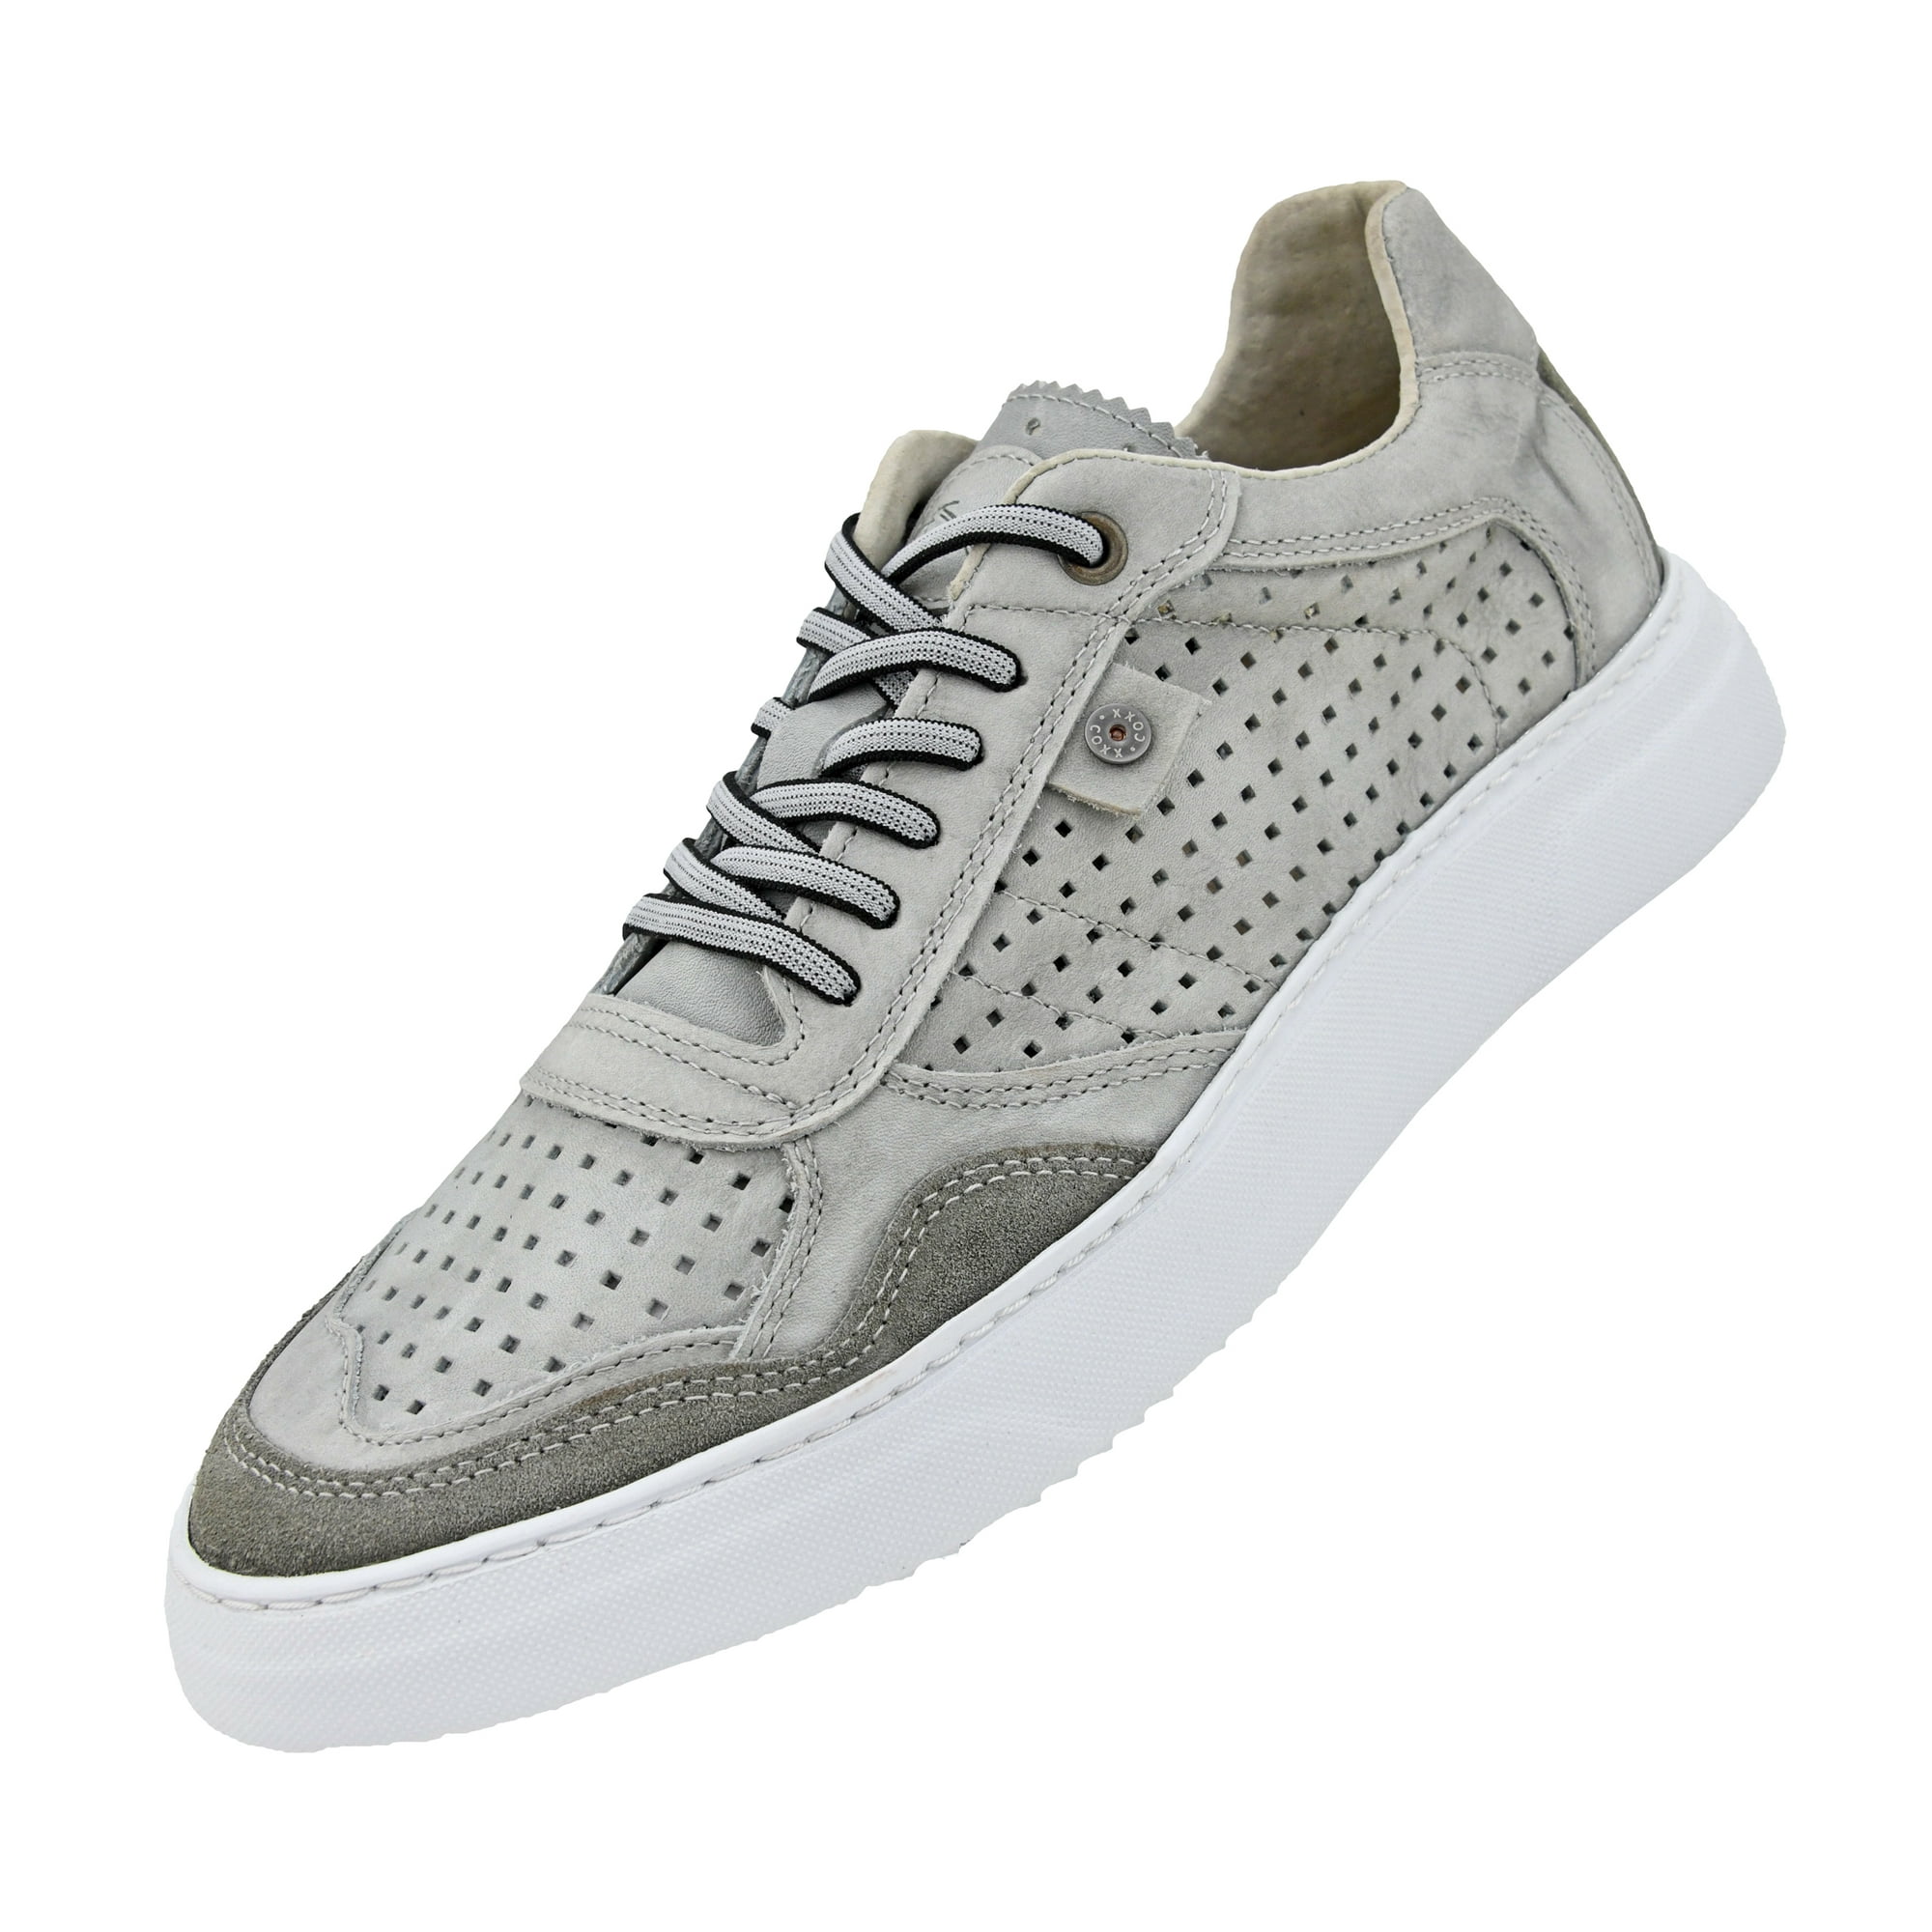 Rose melodisk Tempel COXX BORBA Genuine Casual Sneaker with Detailed Perforations and White  Bottom, Hand Crafted in Portugal - Walmart.com